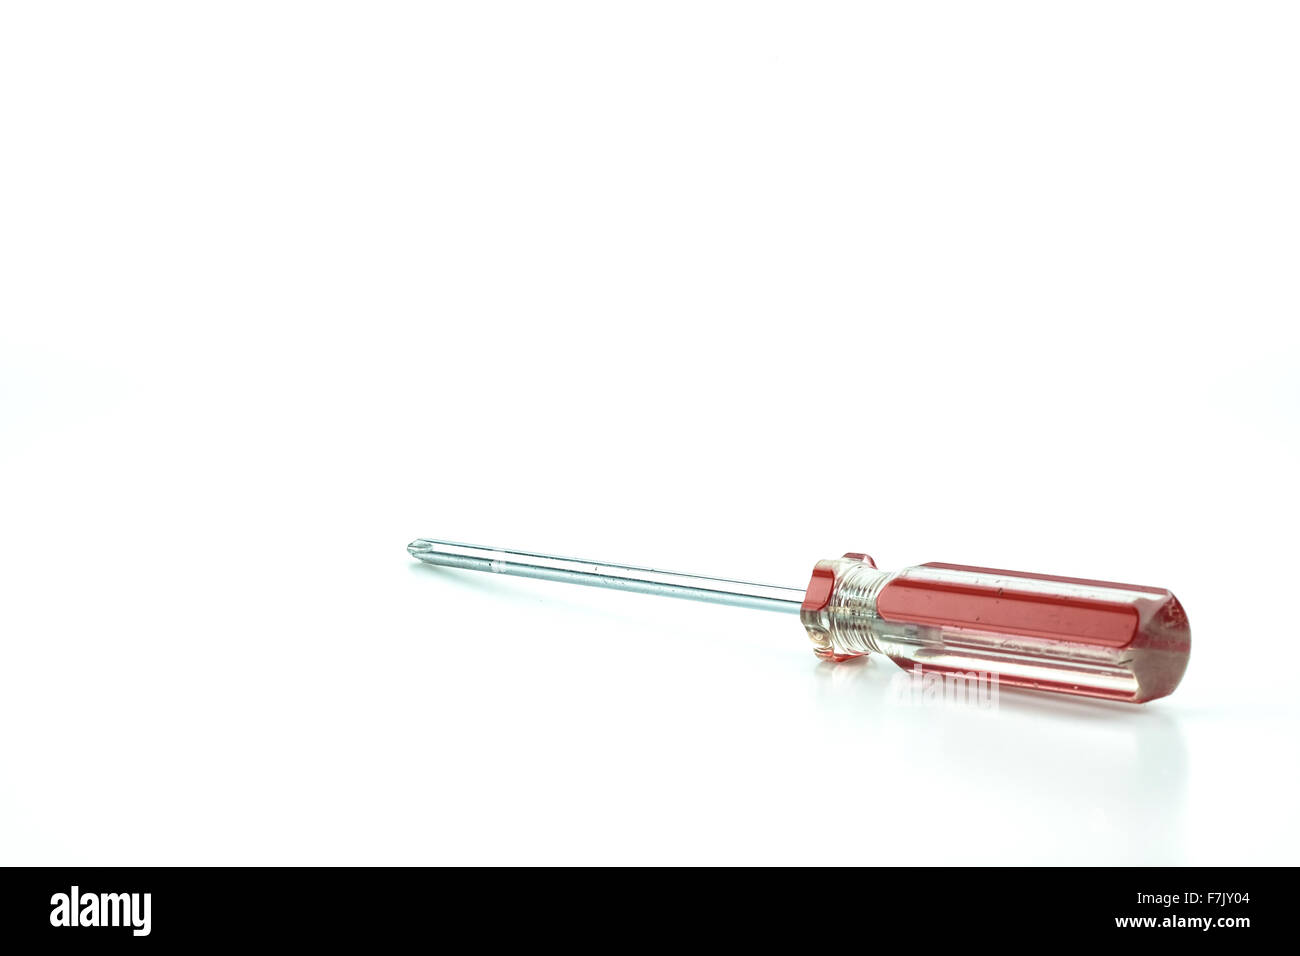 Red screwdriver, isolated in white background Stock Photo